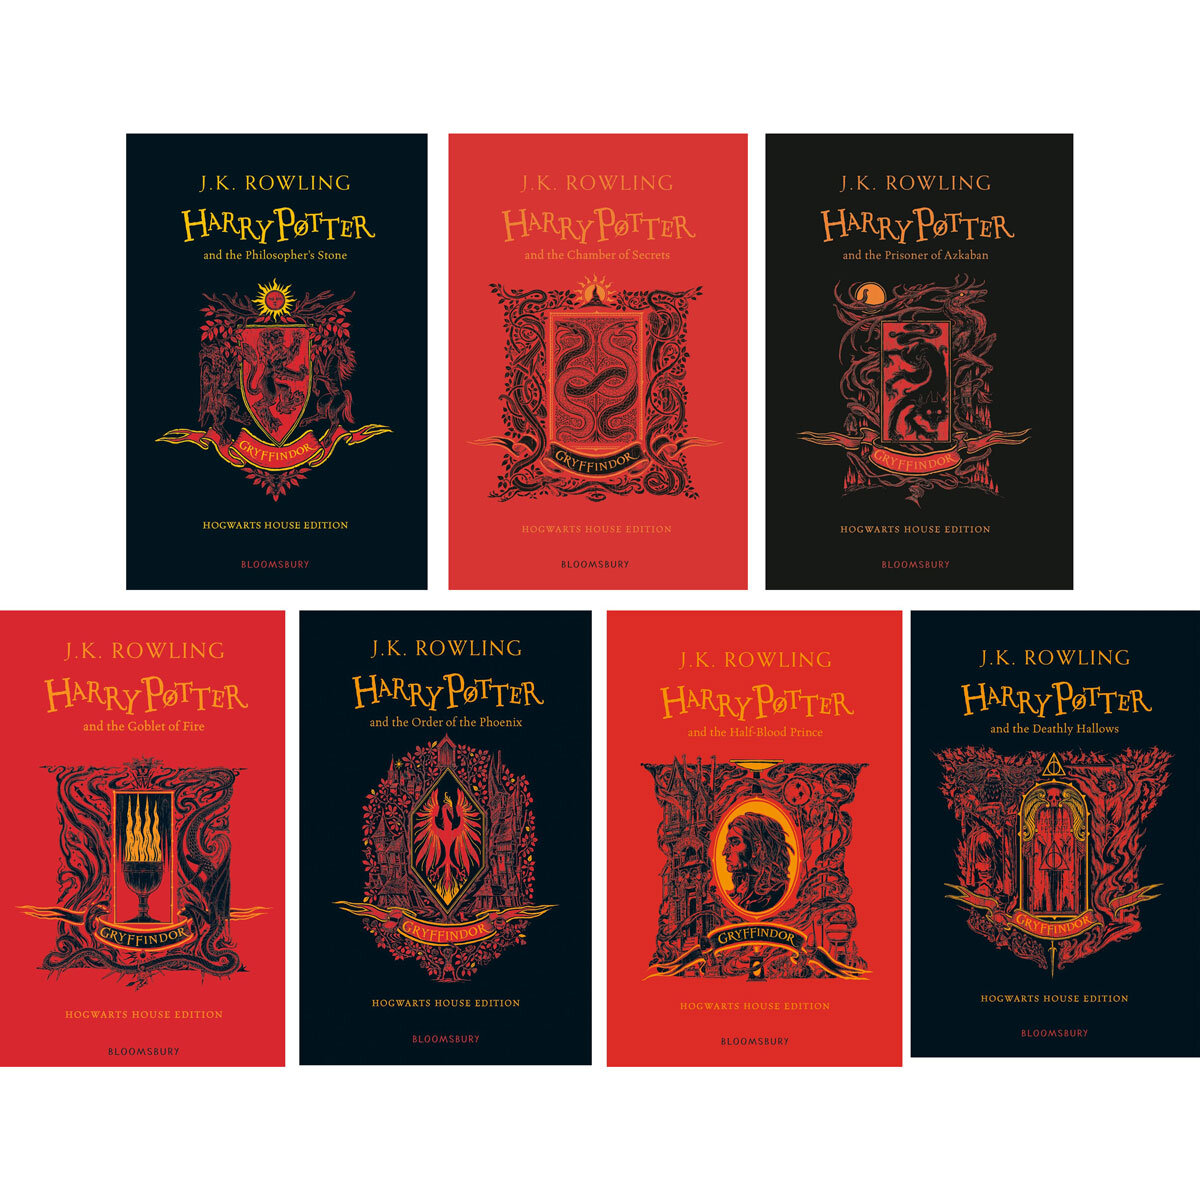 Harry Potter and the Deathly Hallows Slytherin Edition (relie